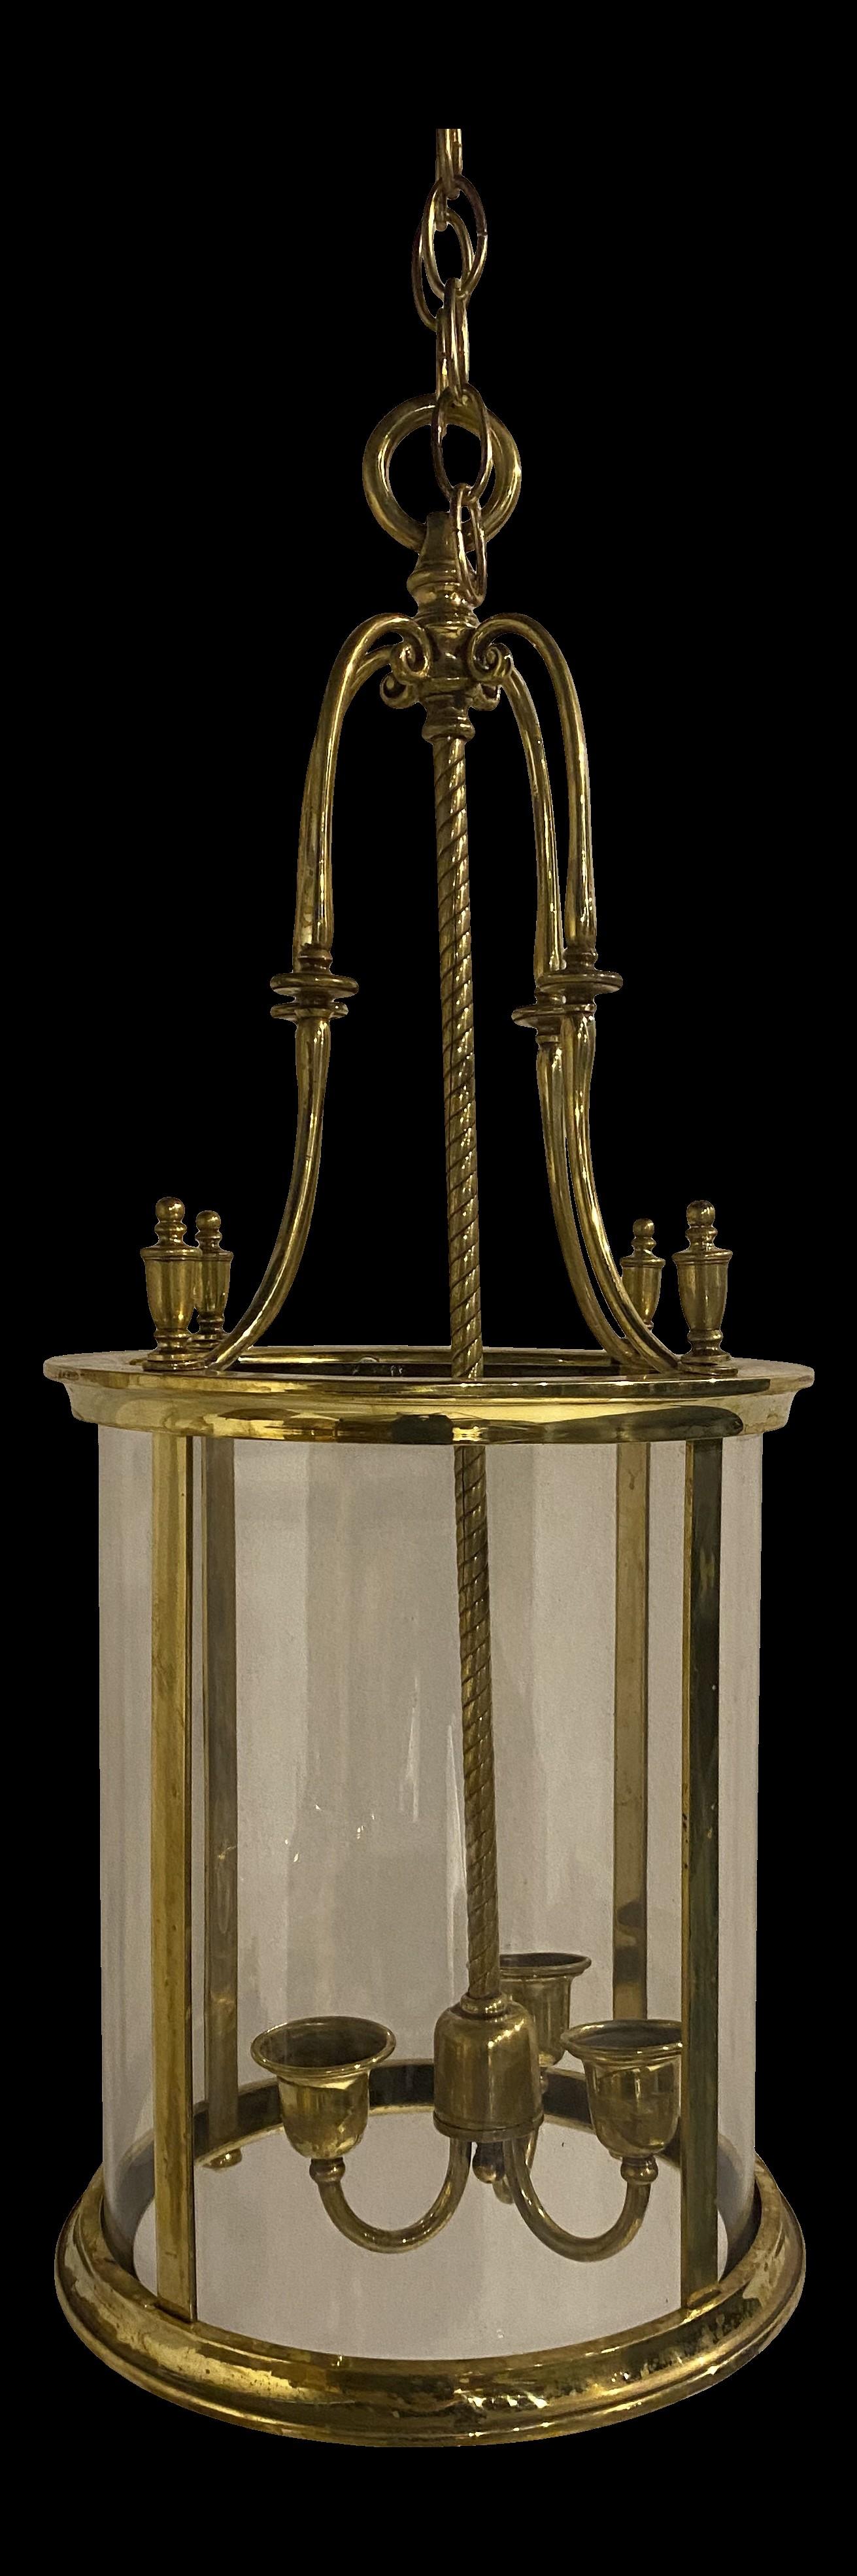 A circa 1920's Caldwell bronze lantern with glass inset, from Waldorf Hotel.